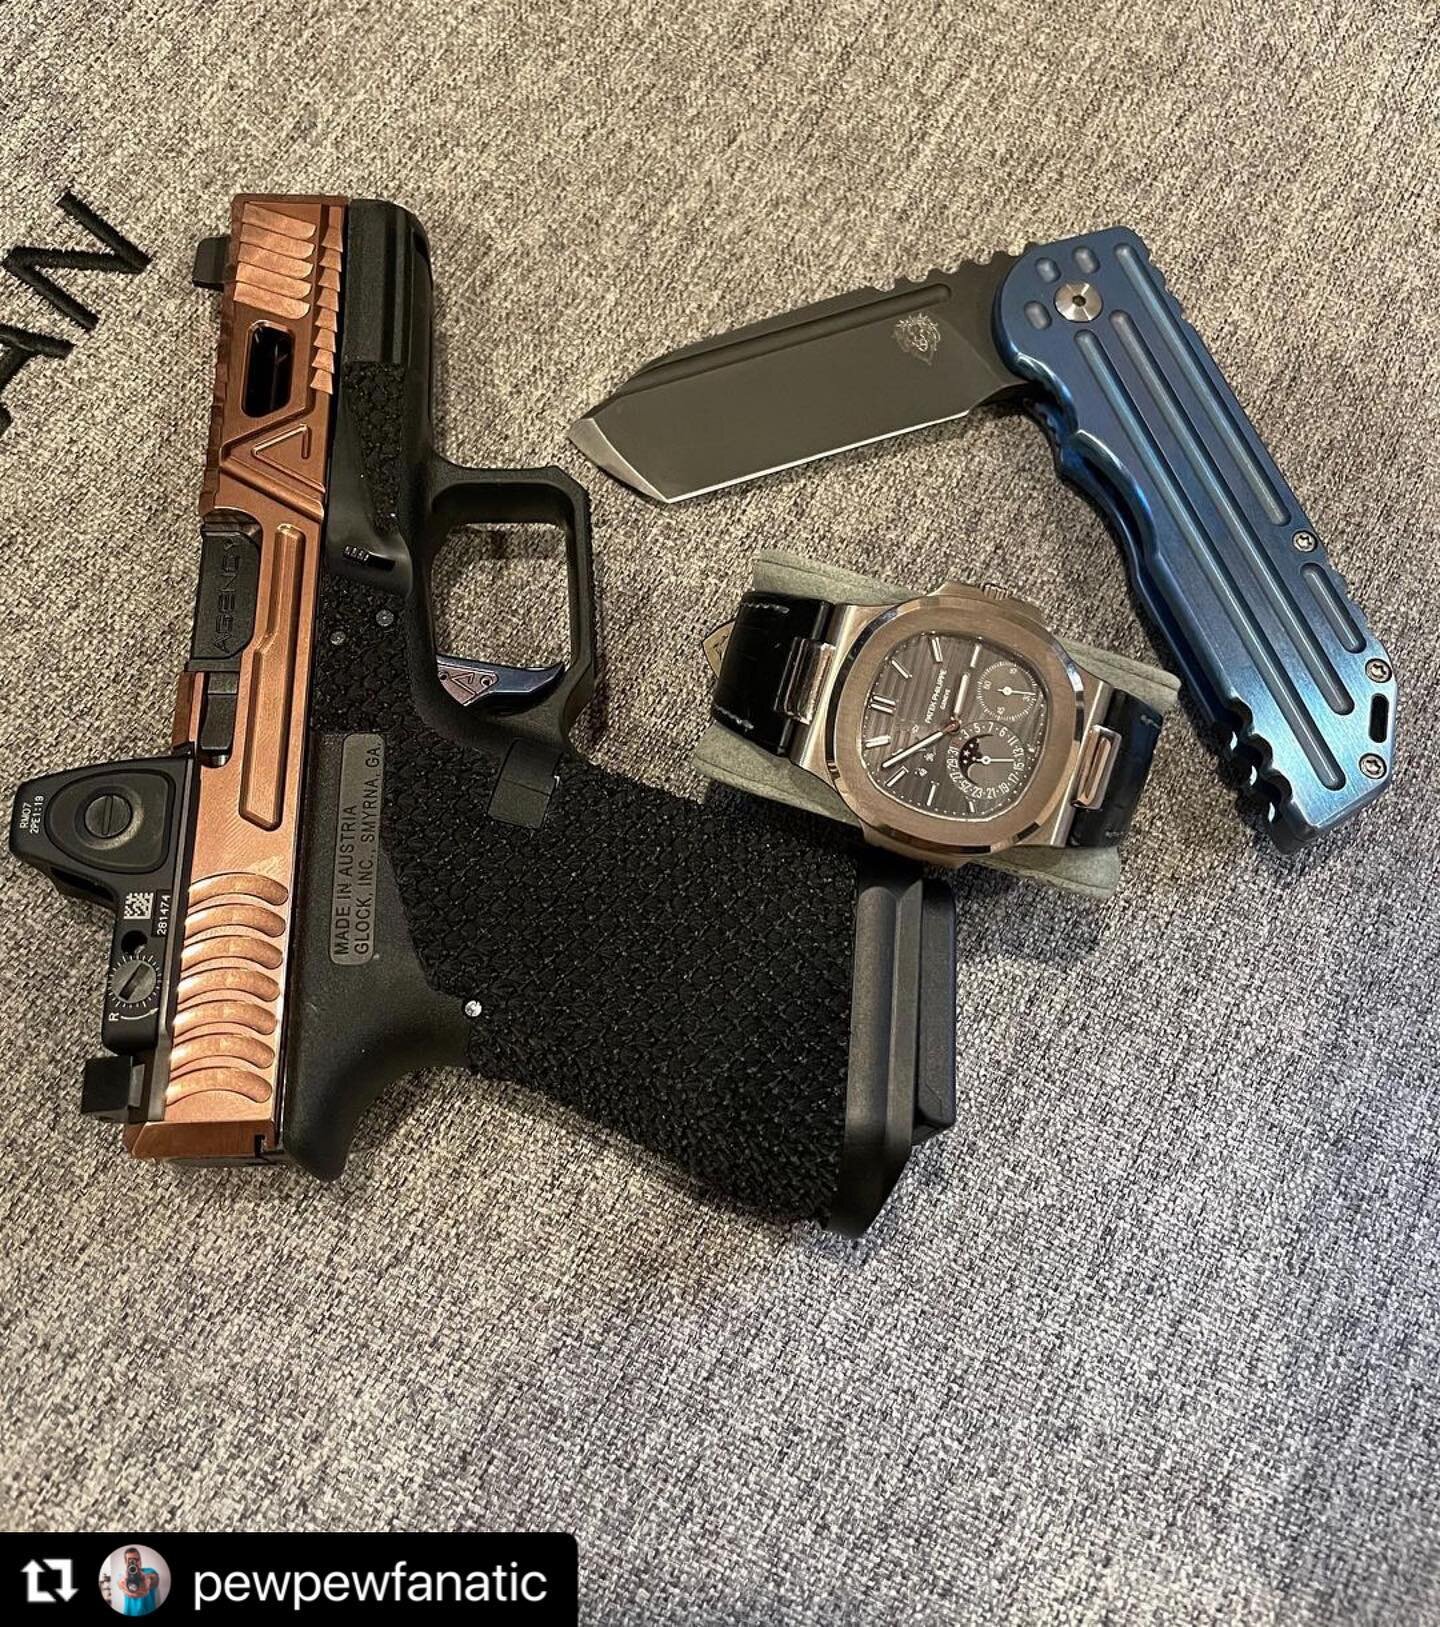 An EDC setup you can&rsquo;t mess with. What&rsquo;s yours? 

#Repost @pewpewfanatic with @make_repost
・・・
These three 🔥 @agencyarms Glock 19, #patekphilippe 5712G and an @alphahuntertacticaldesign Warhorse

#agencyarms #syndicate #agentlife #agency